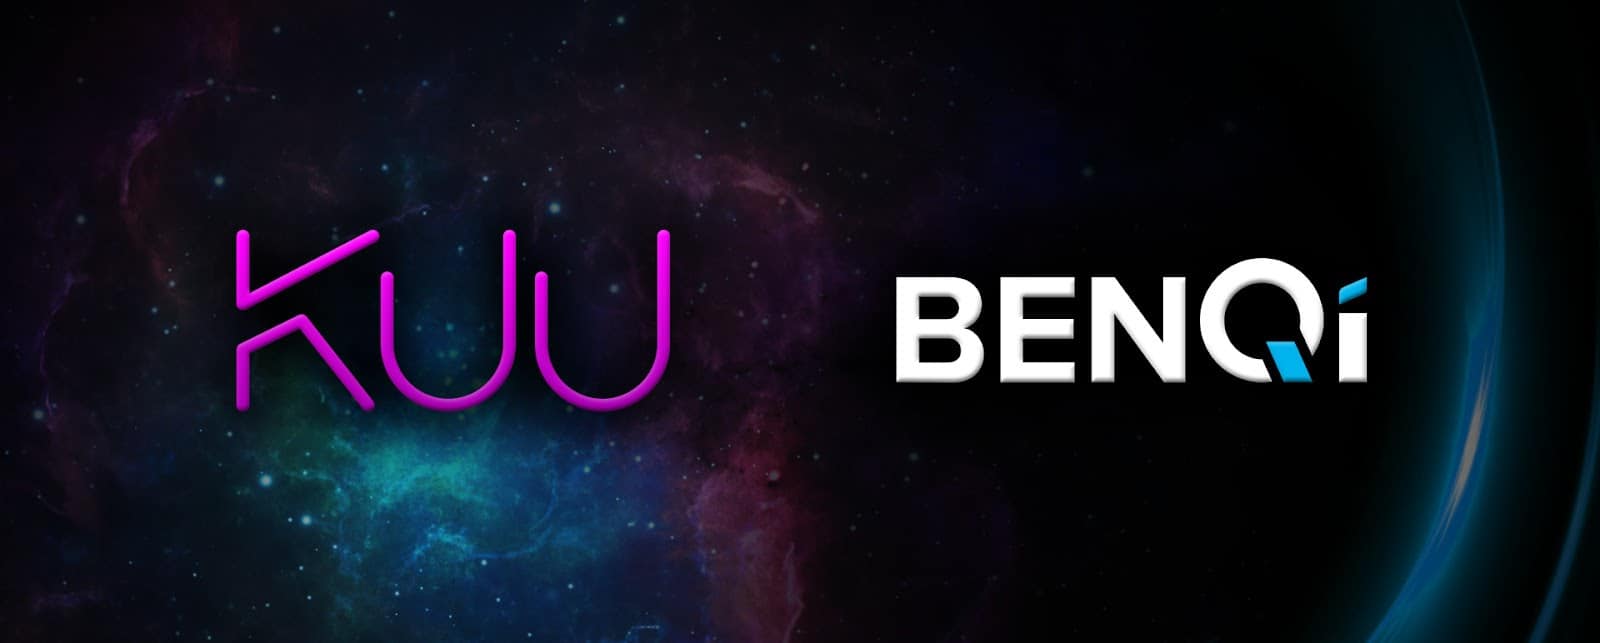 Decentralized-liquidity-underwriter-kuu-partners-with-benqi-to-scale-defi-on-avalanche